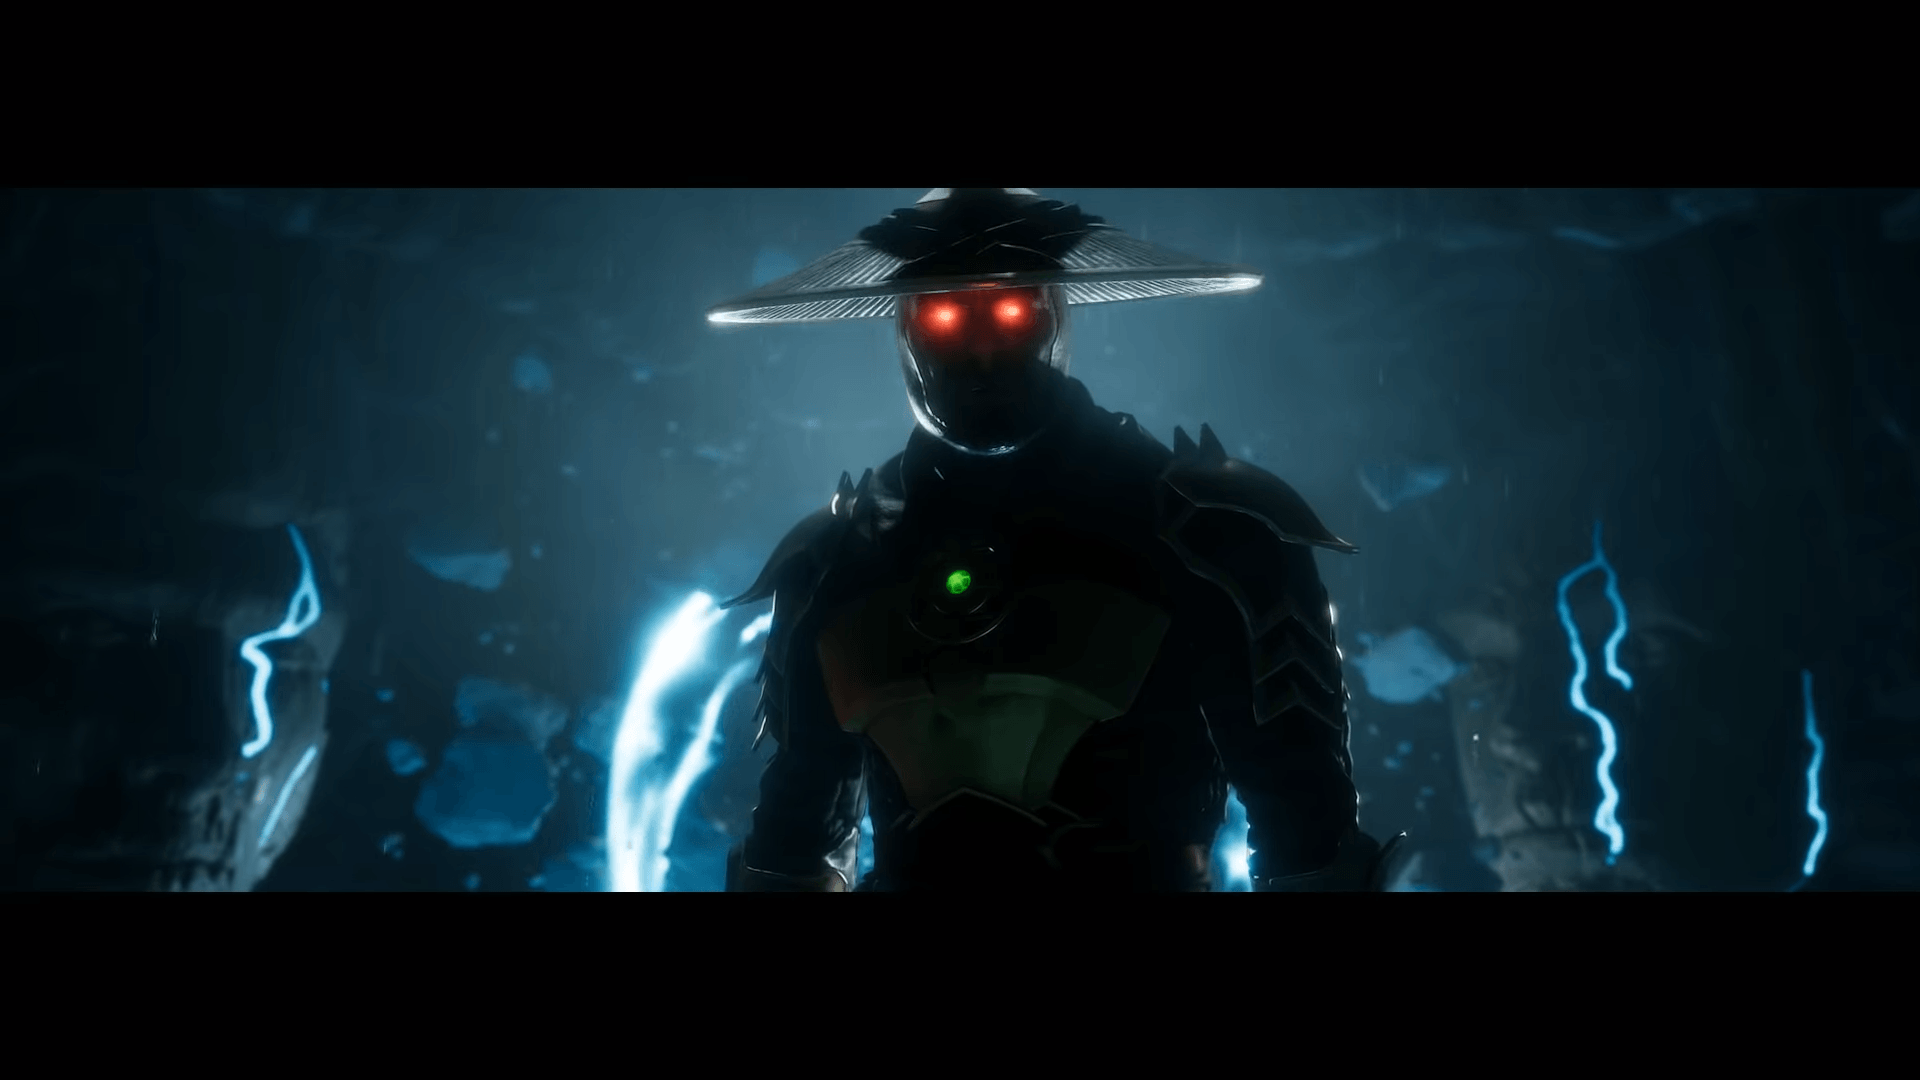 Mortal Kombat 11: What to expect from the Story Mode